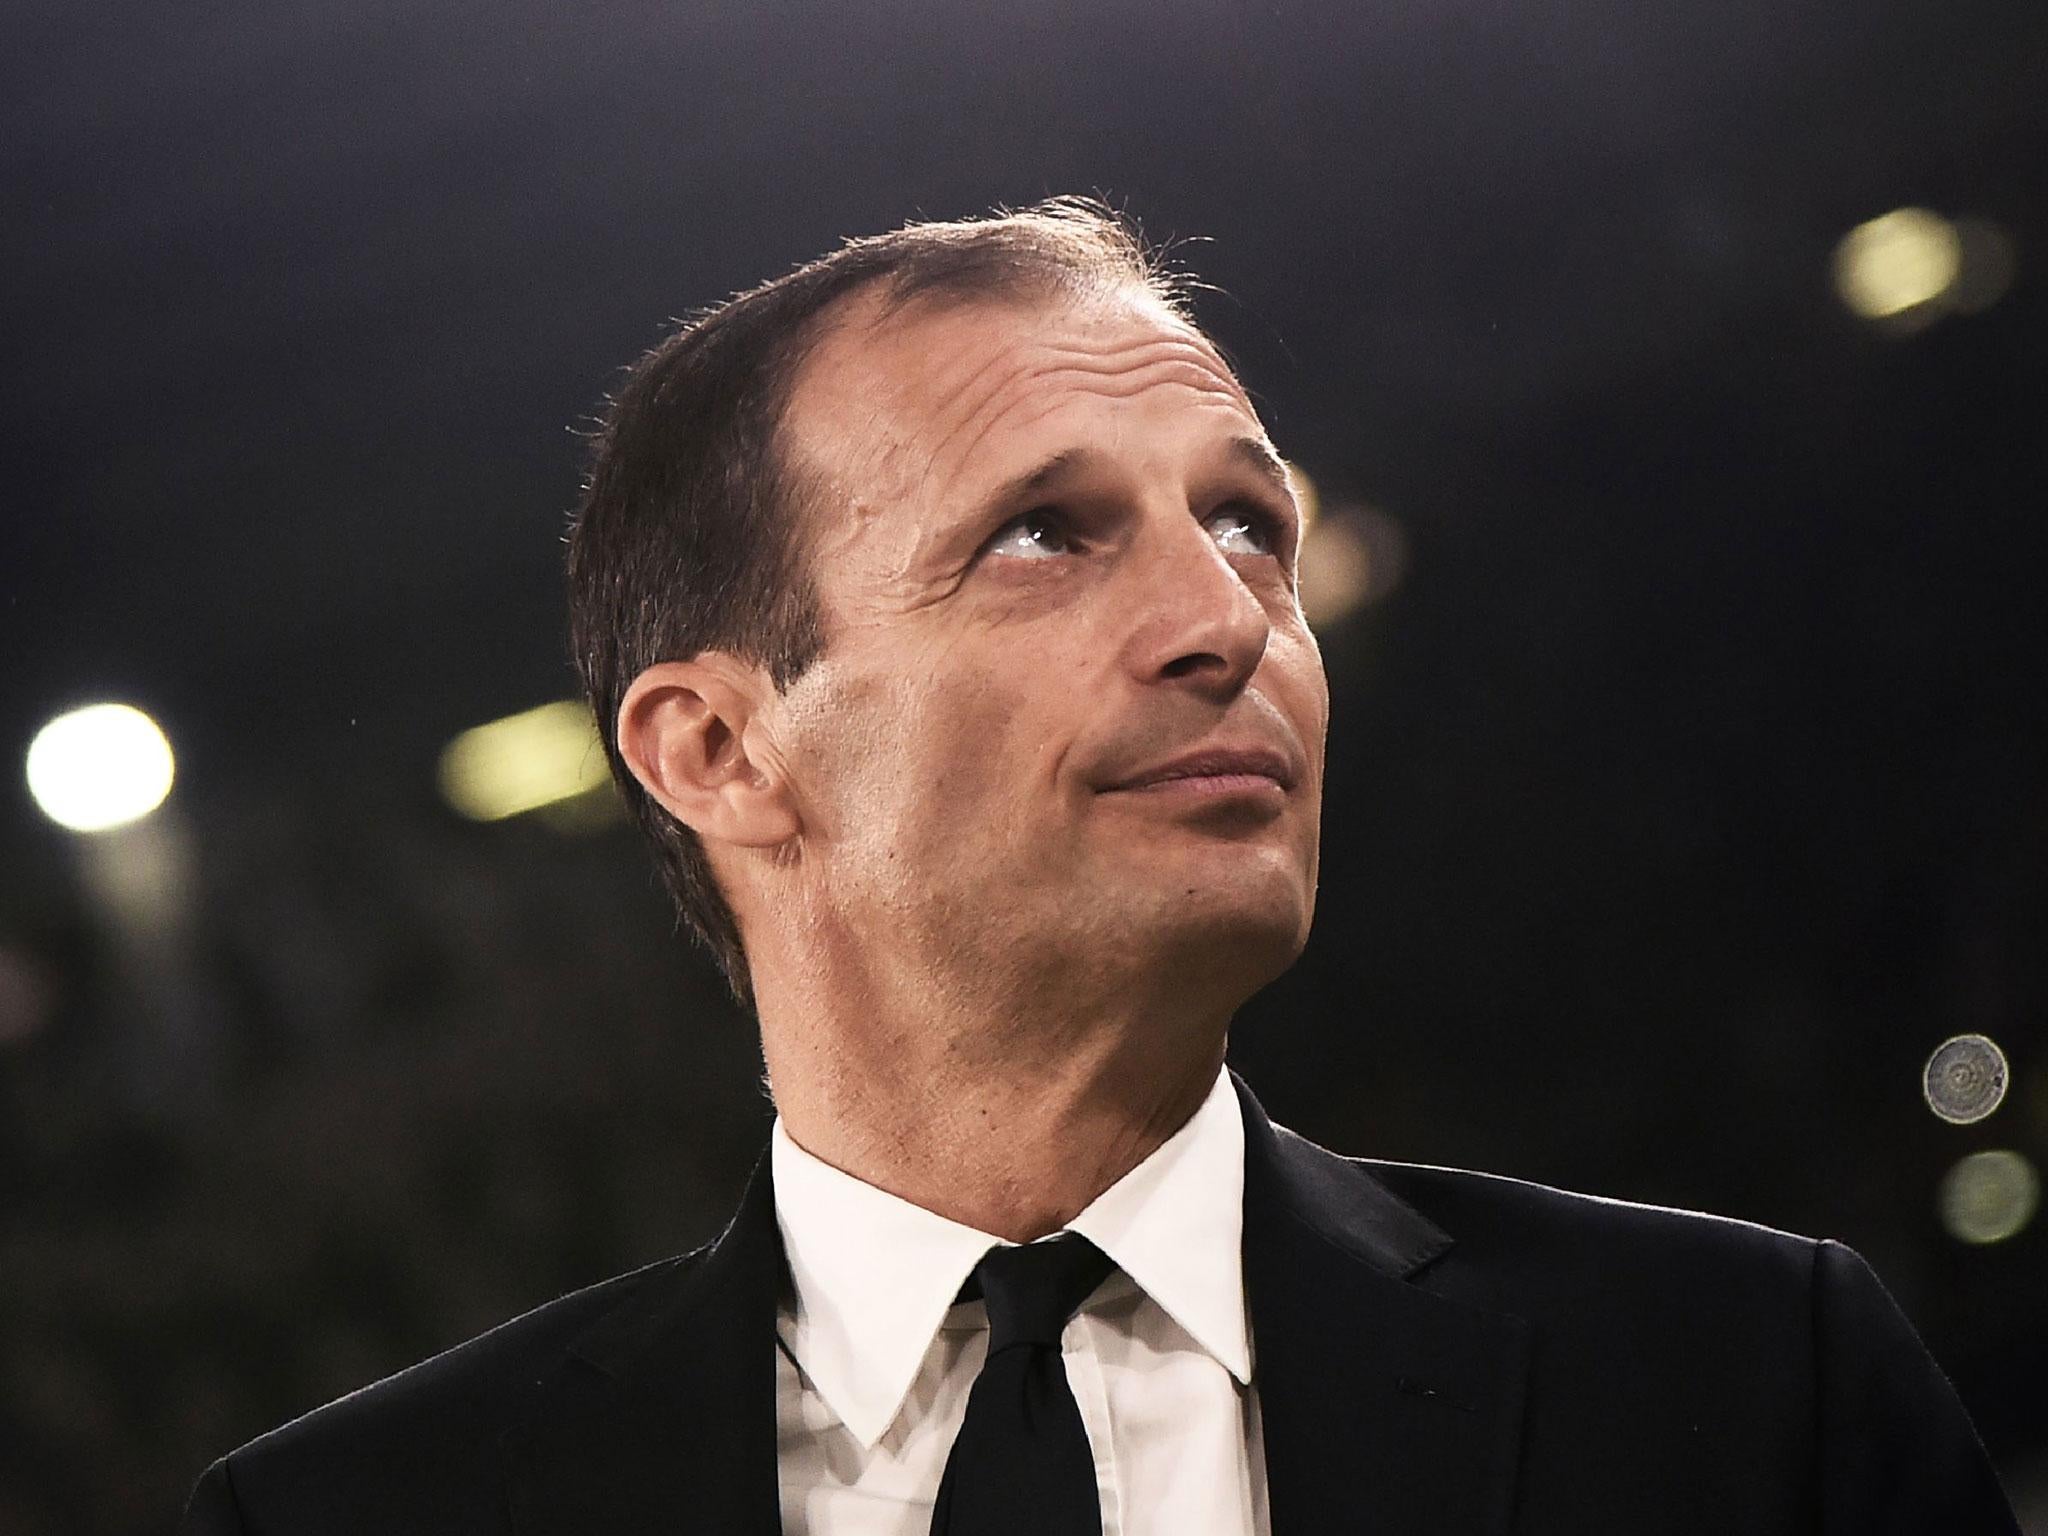 Allegri is said to be interested in the job